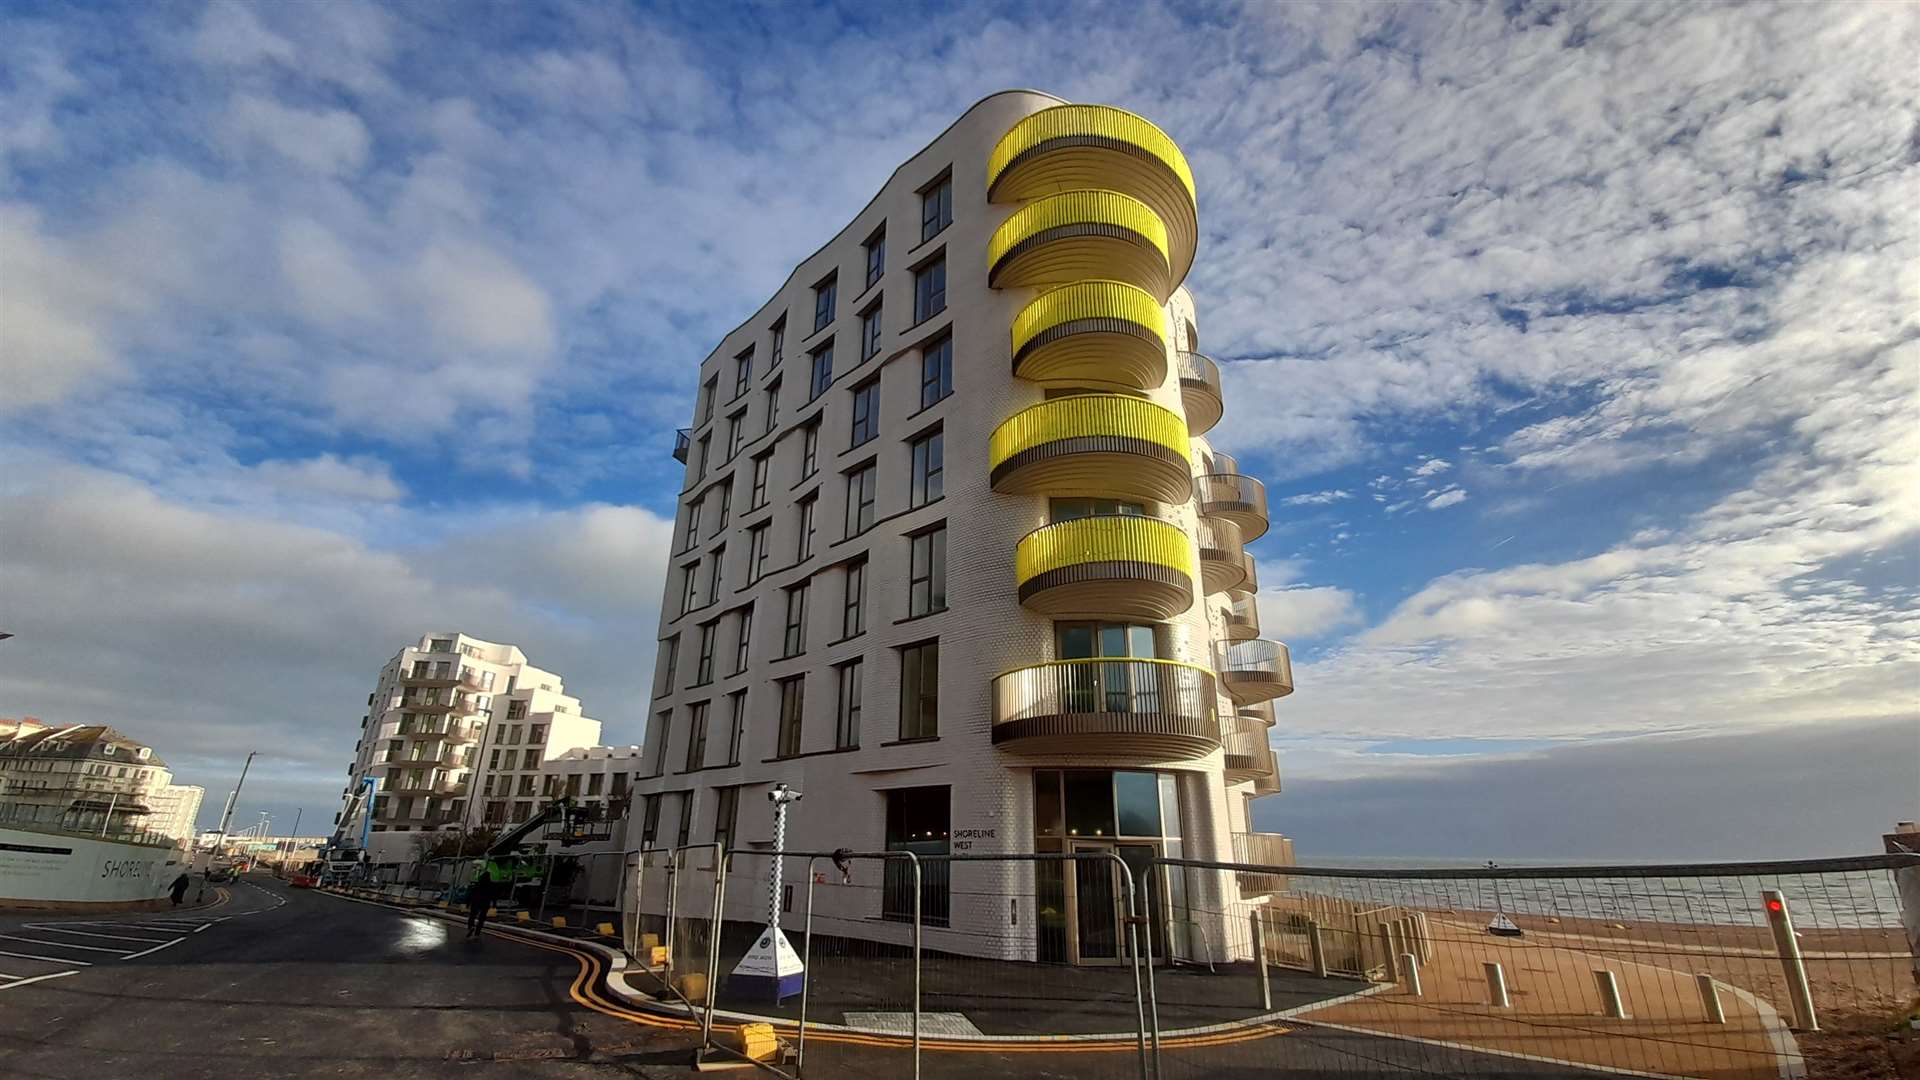 Bosses at FHSDC say the yellow balconies are only 'temporary' while building work continues